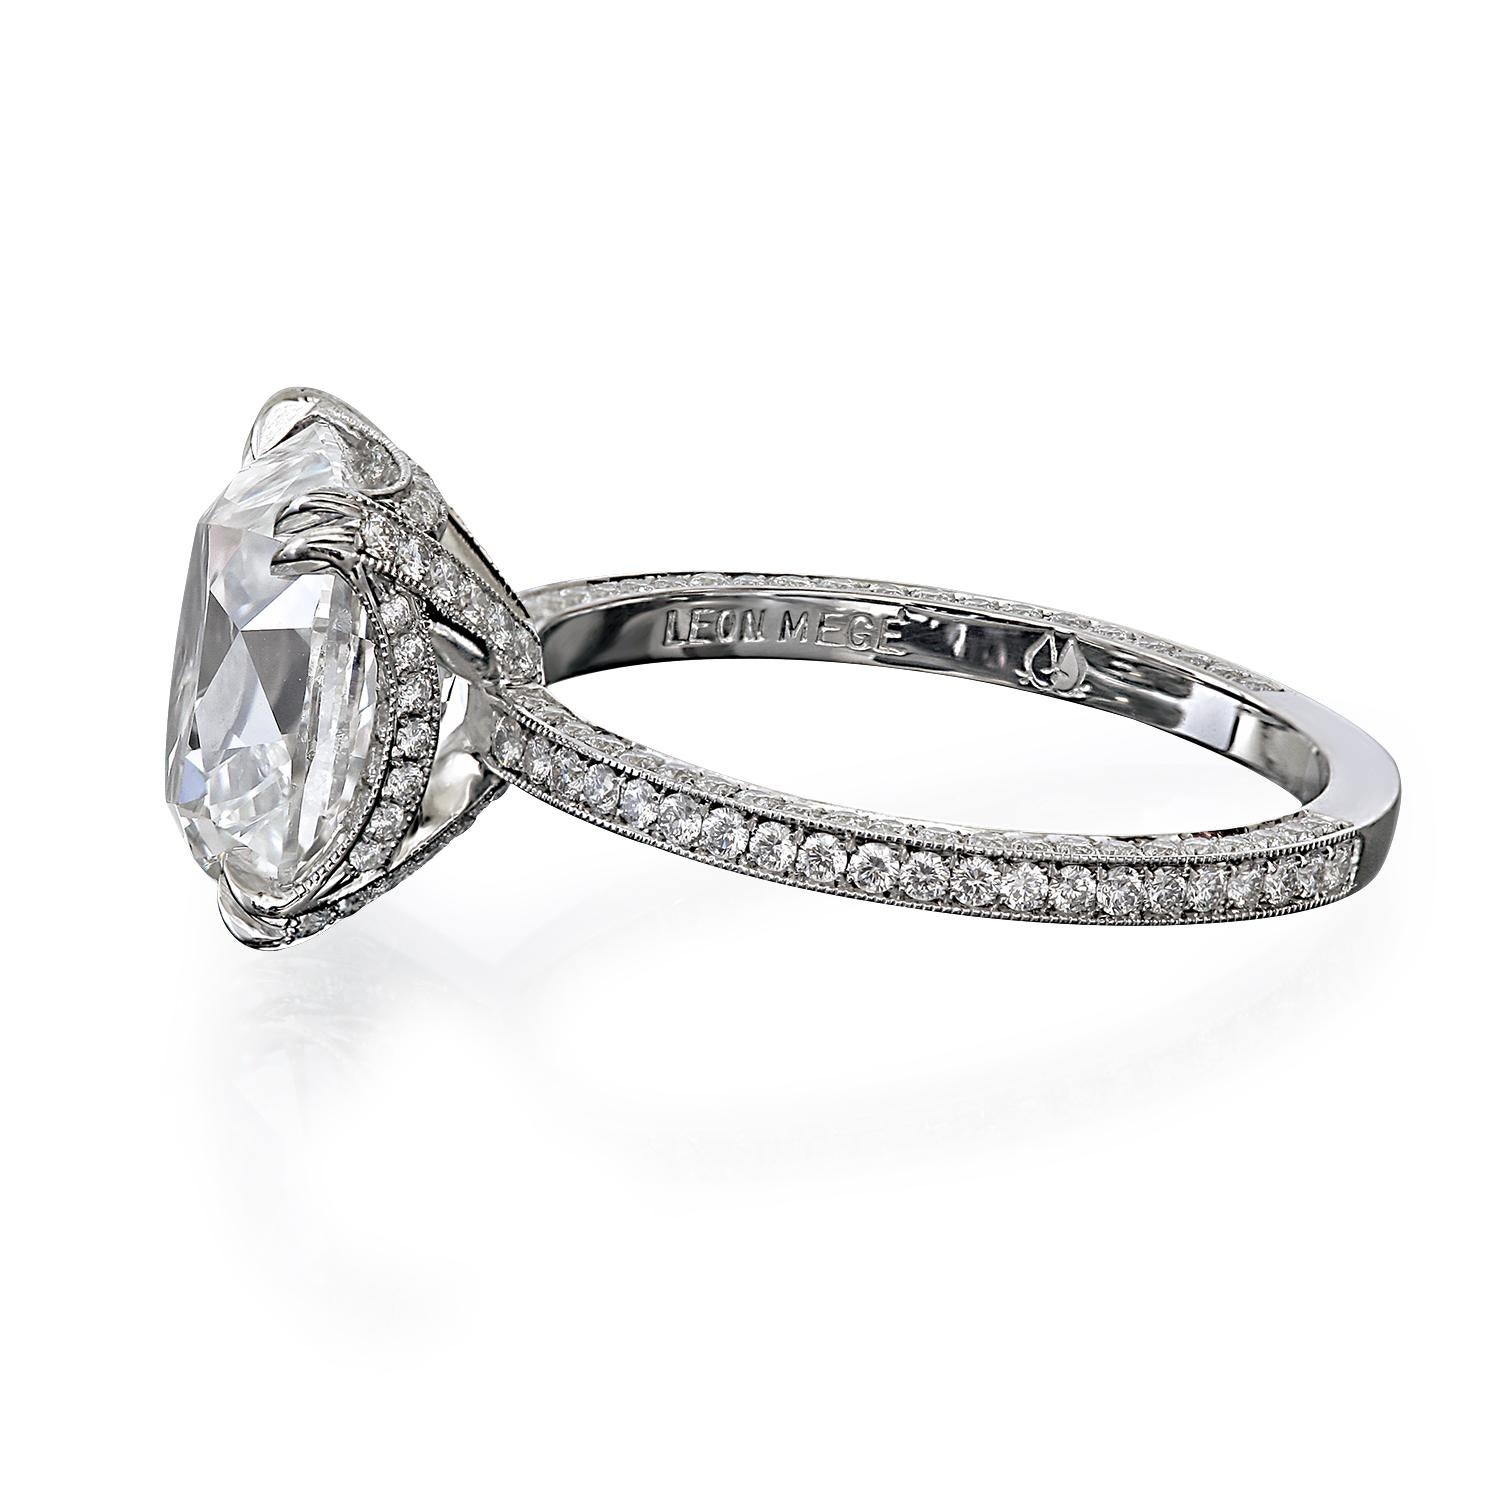 Cosmo™ engagement ring featuring the GIA-certified 2.12 ct G/VS1 True Antique™ cushion diamond.
The center stone is accentuated with bright-cut pave set delicately in the basket and on all three sides of the uniform shank completed with millegrain